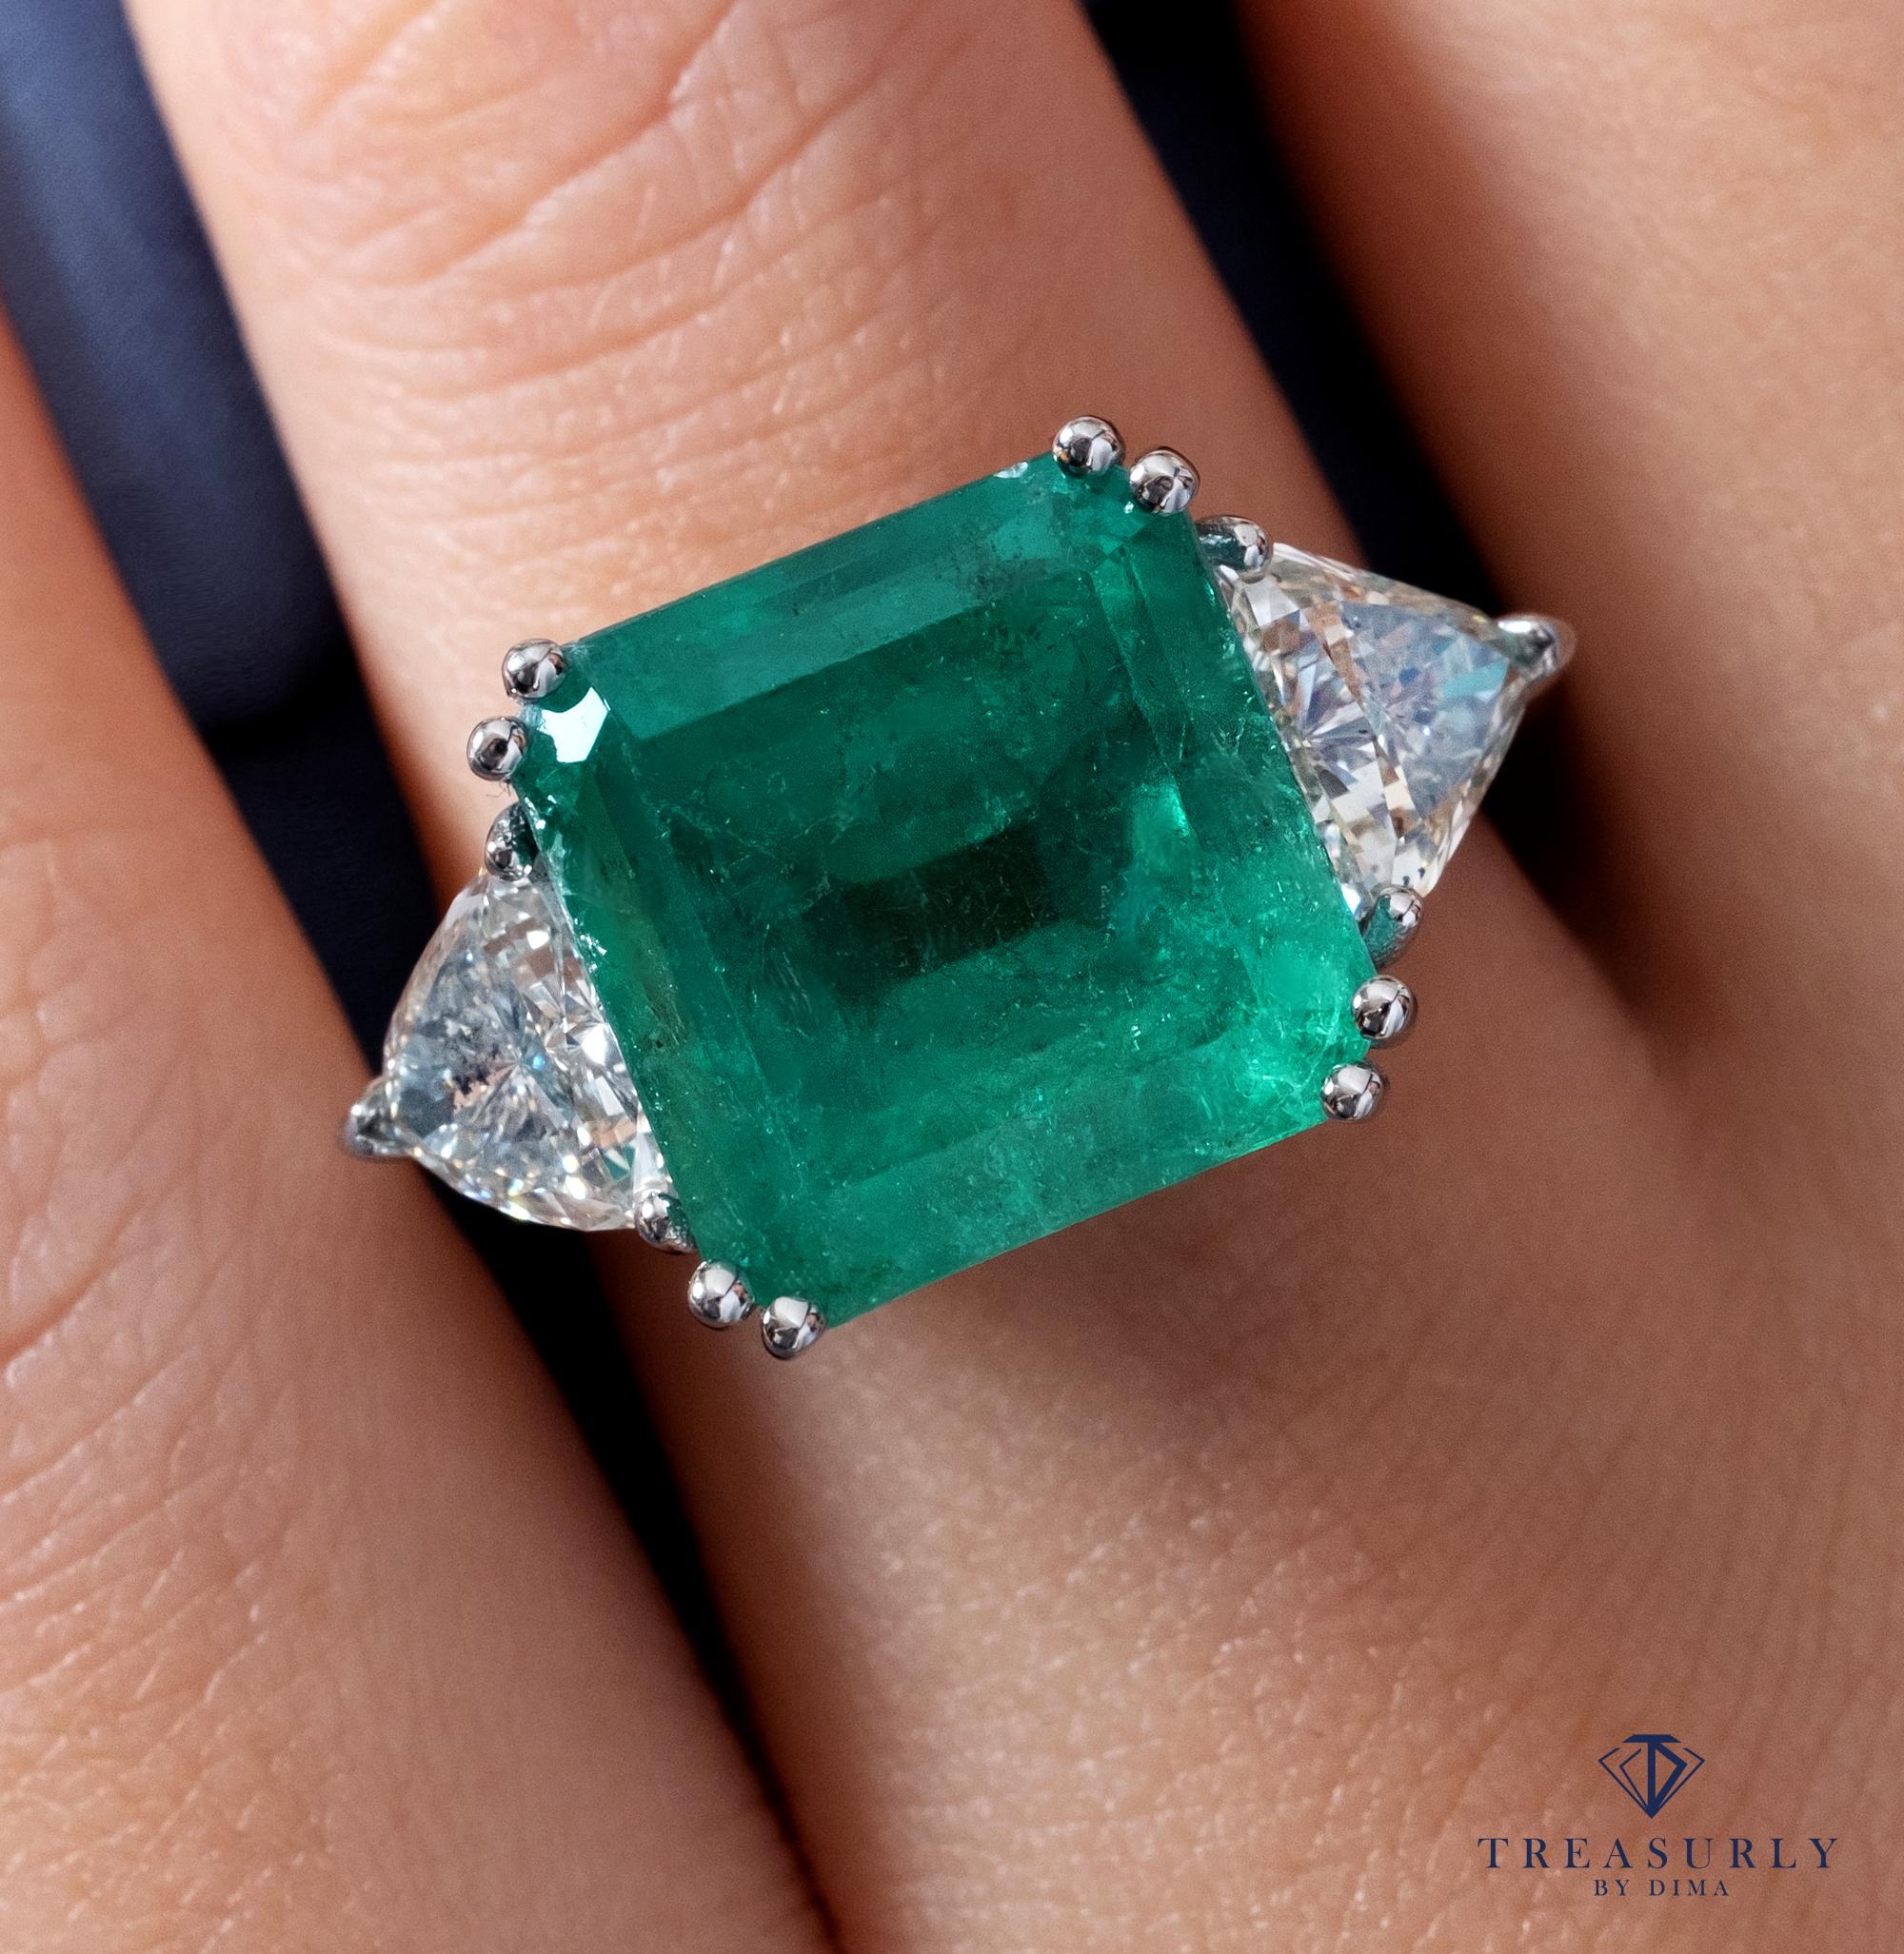 Three Stone Engagement Anniversary Ring with GIA 10.64ct Columbian Square Green Emerald & Diamonds.

This jewel will make a great addition to any GEM/jewelry collection... It is rear to find an emerald over 3ct size, but almost 9ct.... just